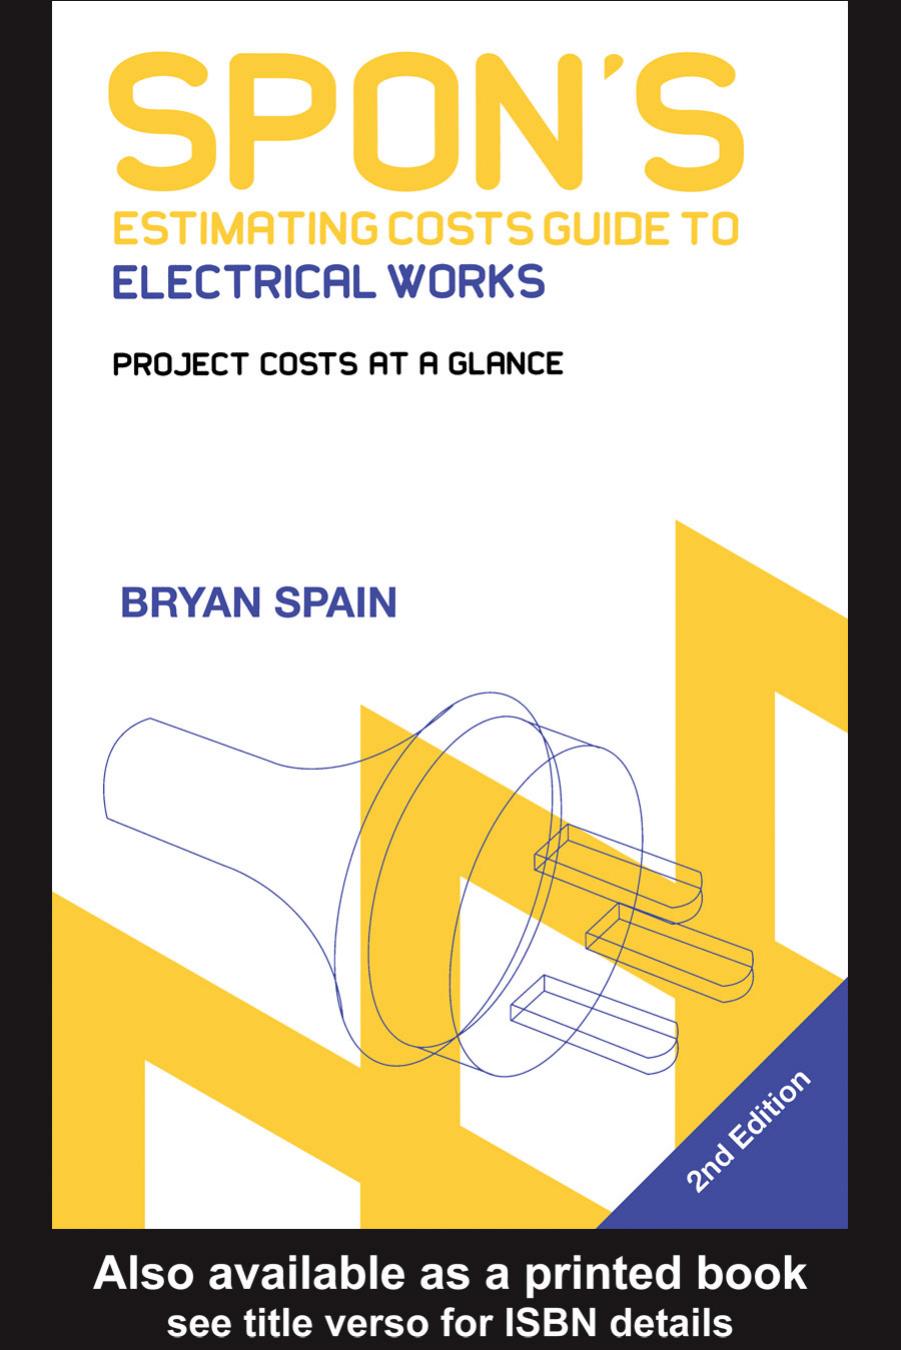 Spon's Estimating Costs Guide to Electrical Works: Project Costs at a Glance